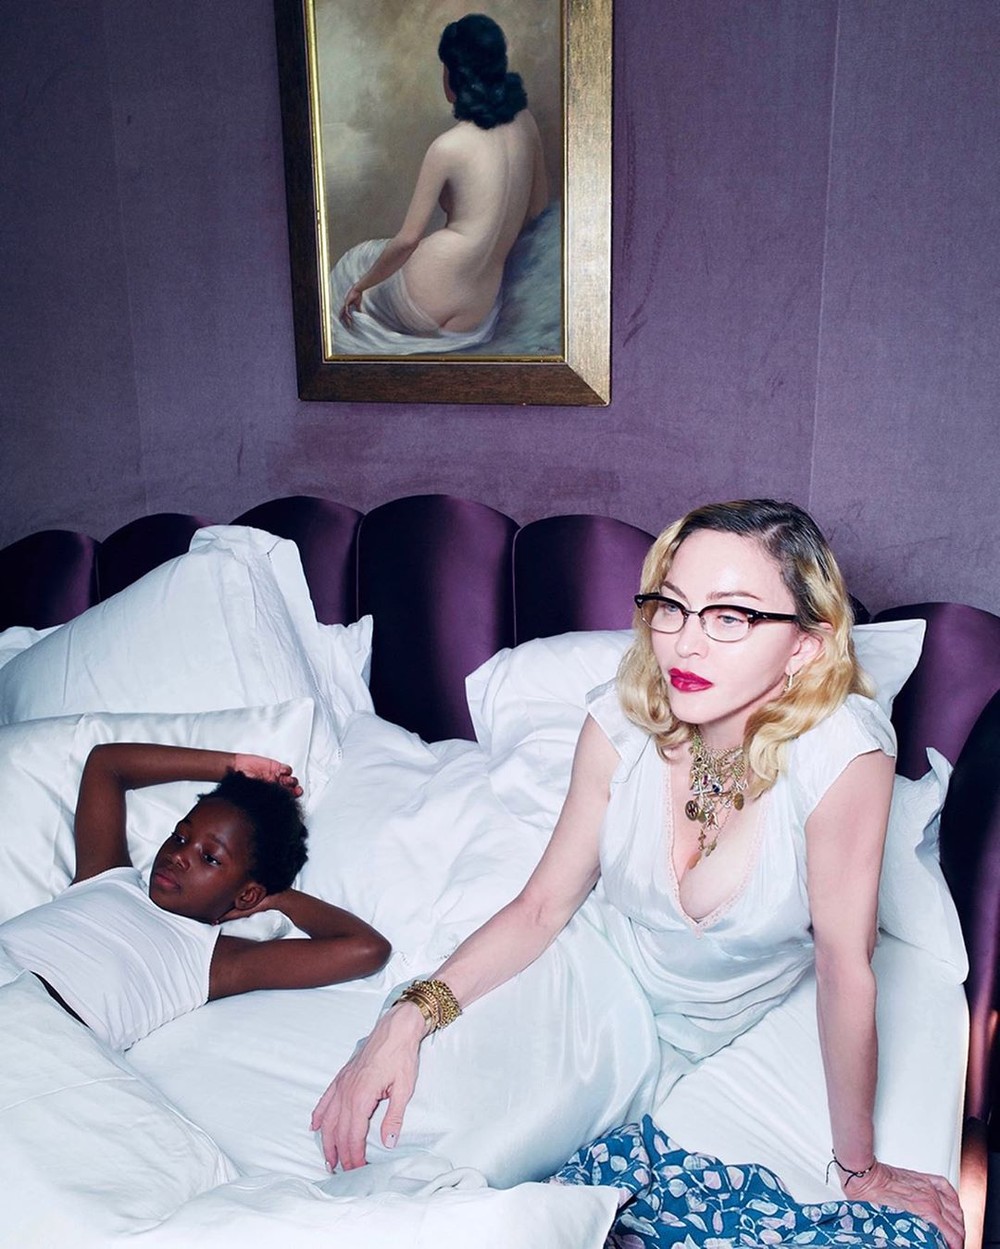 Pop queen Madonna shows off her incredibly sexy body at the age of 62 - Photo 3.